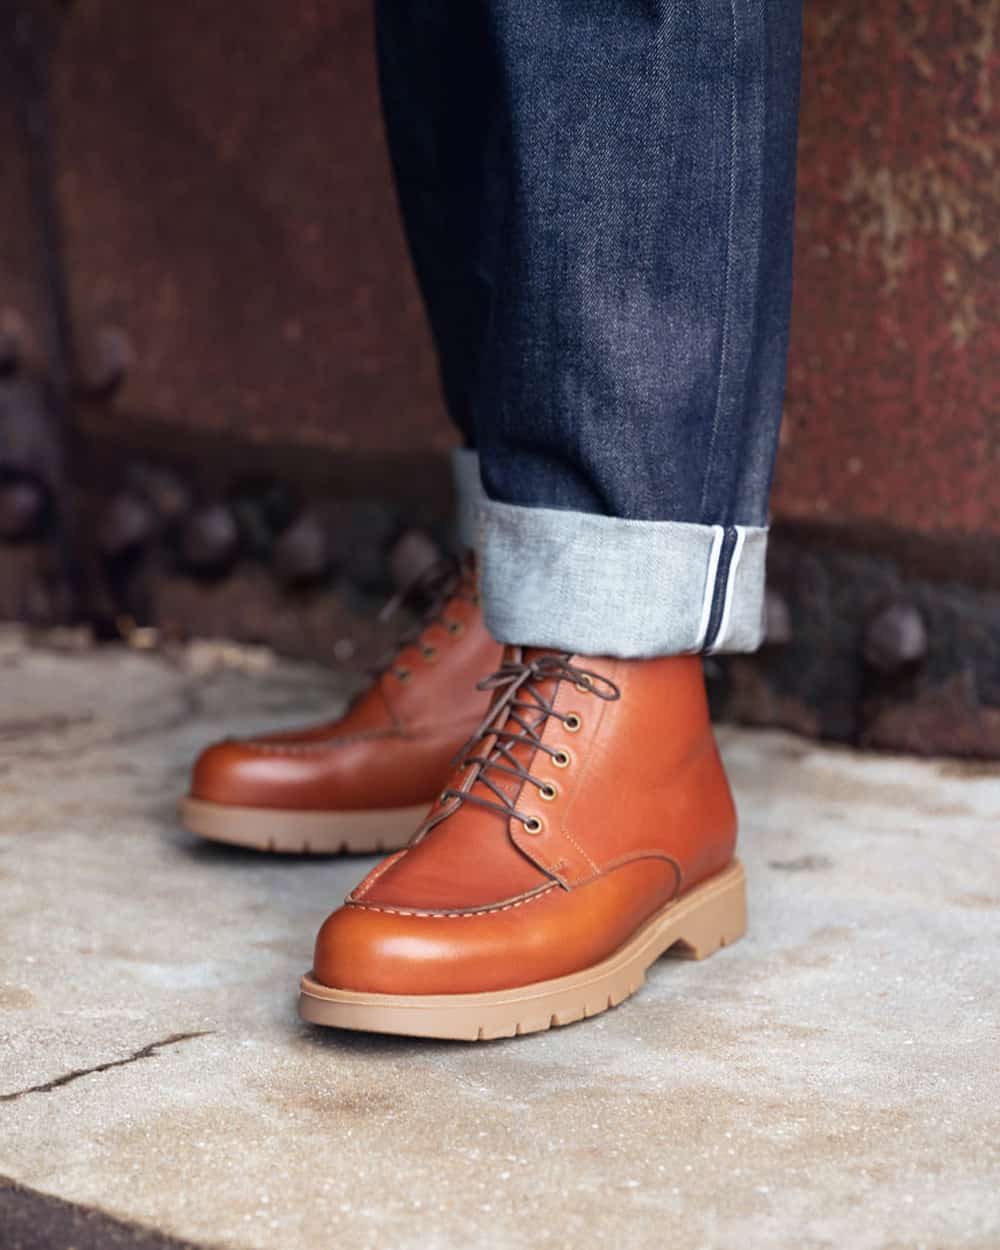 11 Most Expensive Work Boot Brands: Worth The Money?